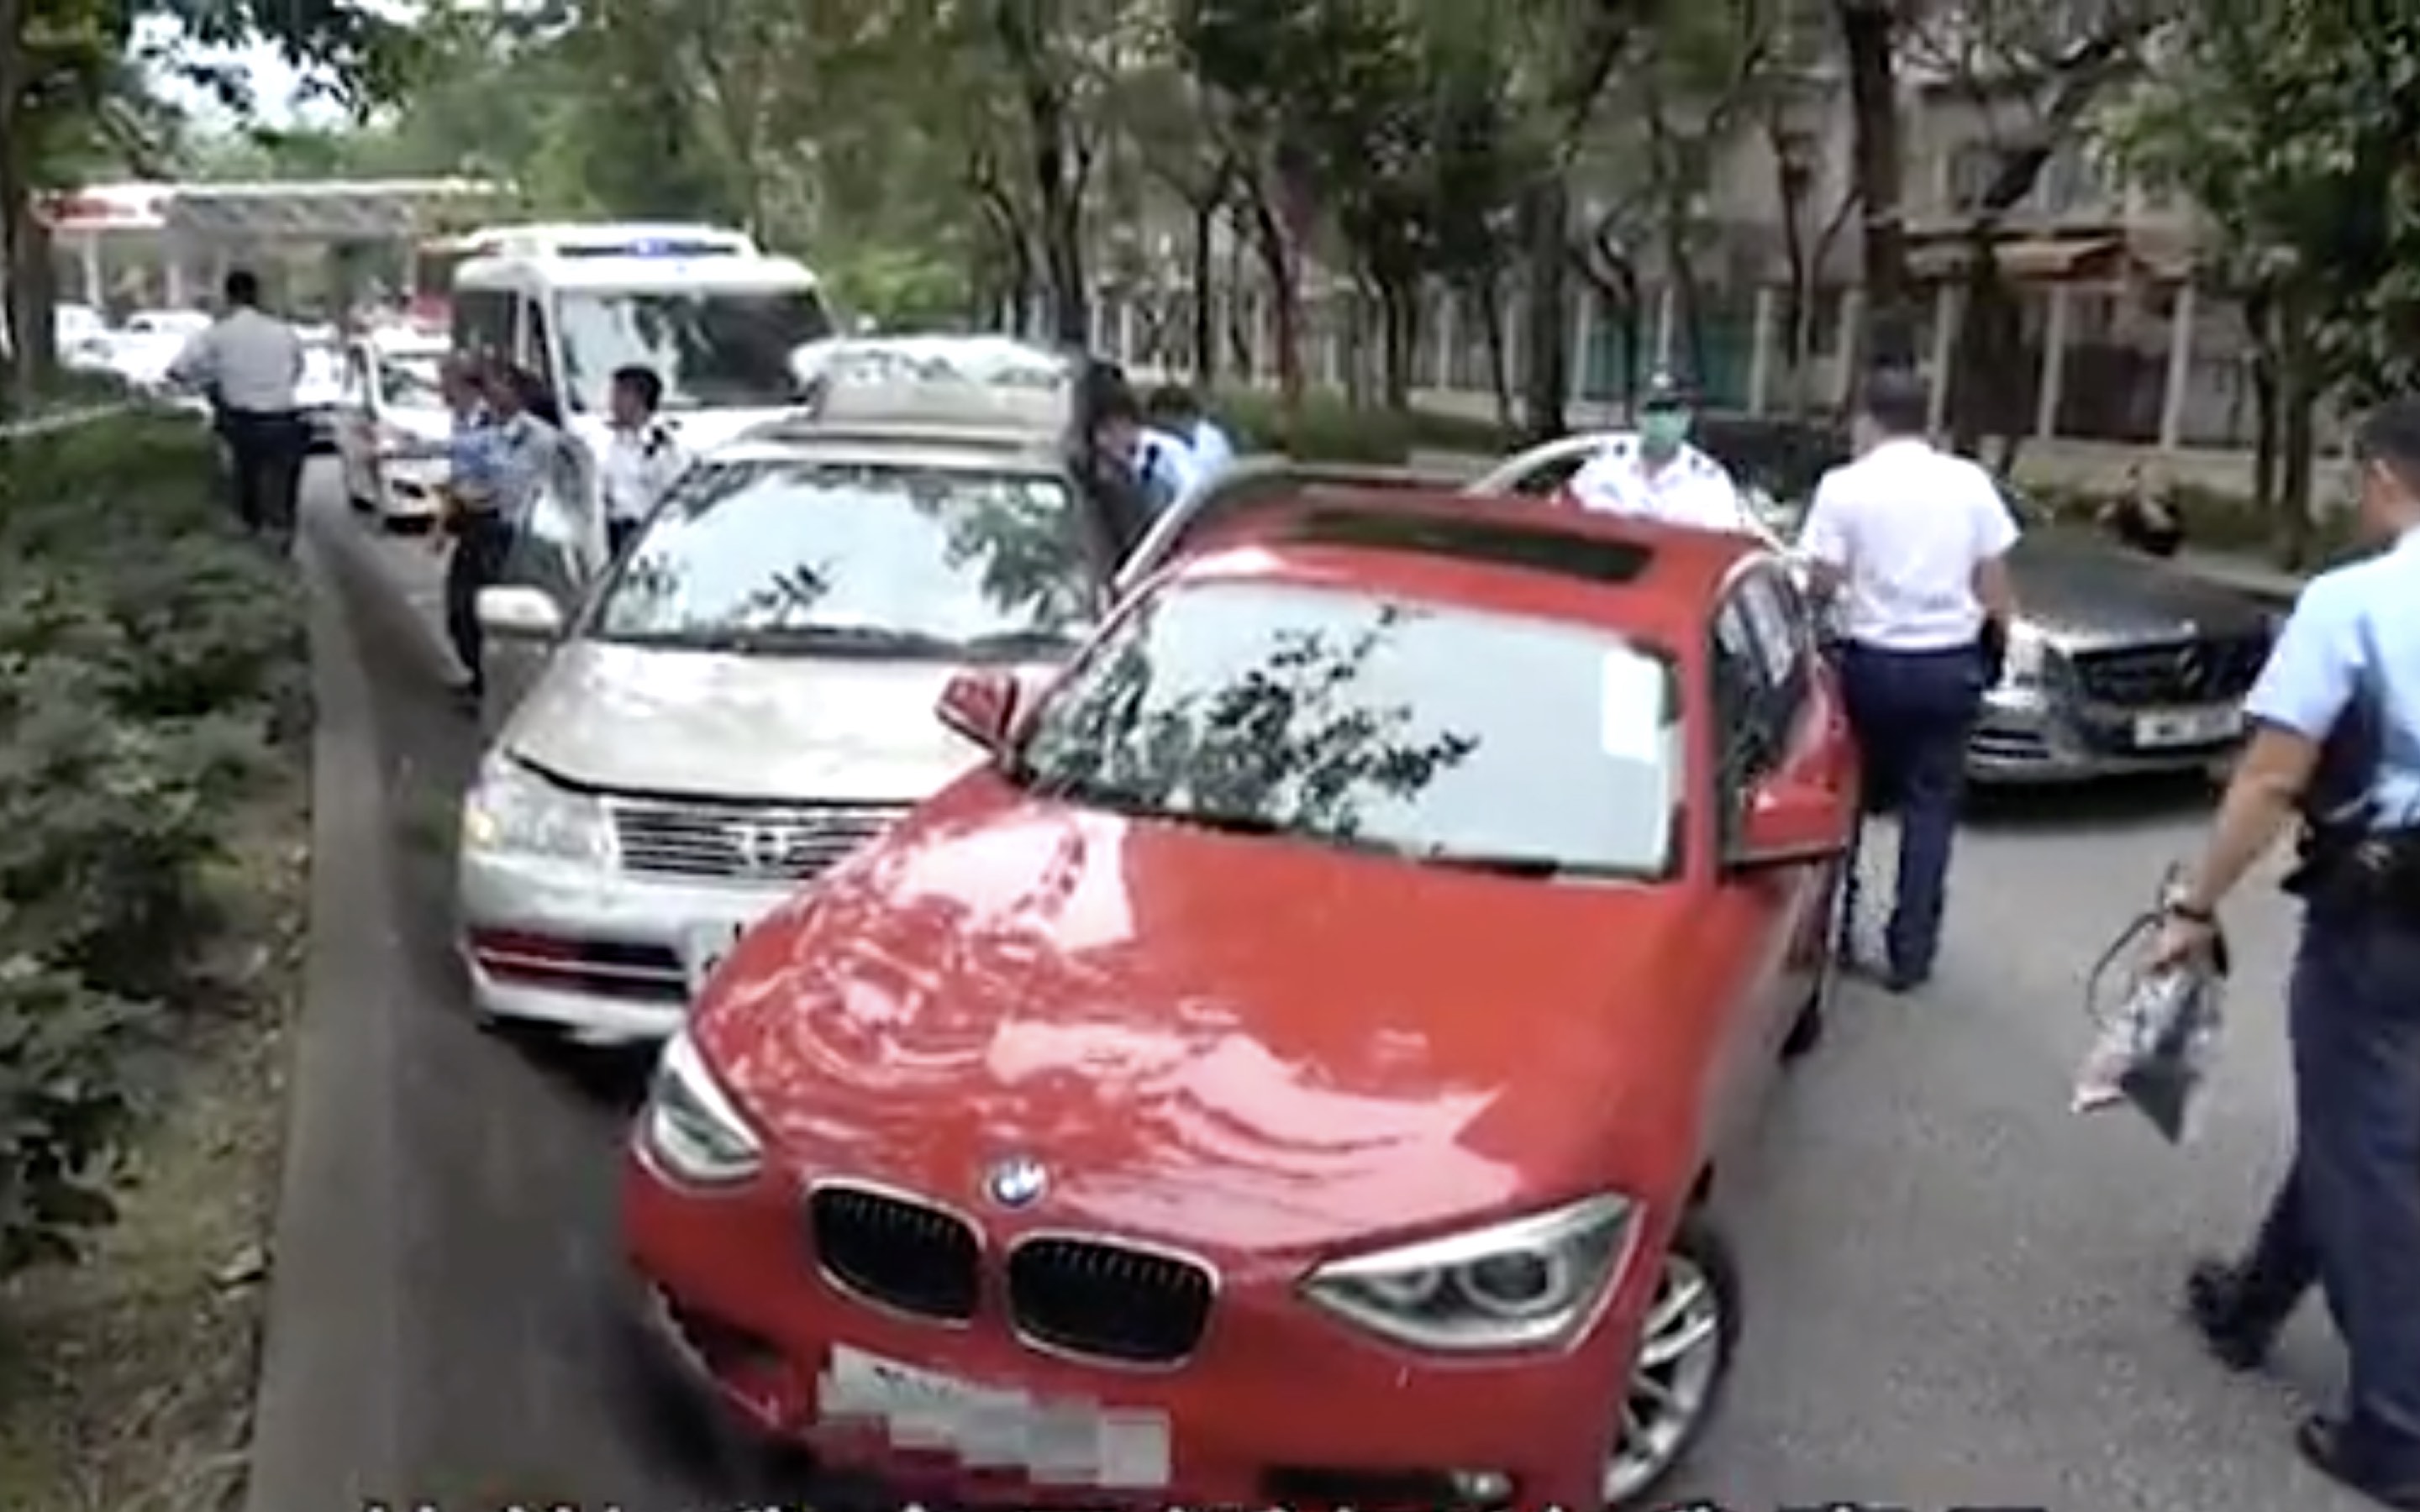 A man who attempted to steal a woman’s handbag was apprehended after the woman pursued him by hanging onto the steering wheel of his car, and her husband cornered him with his car. Screengrab via Apple Daily video.